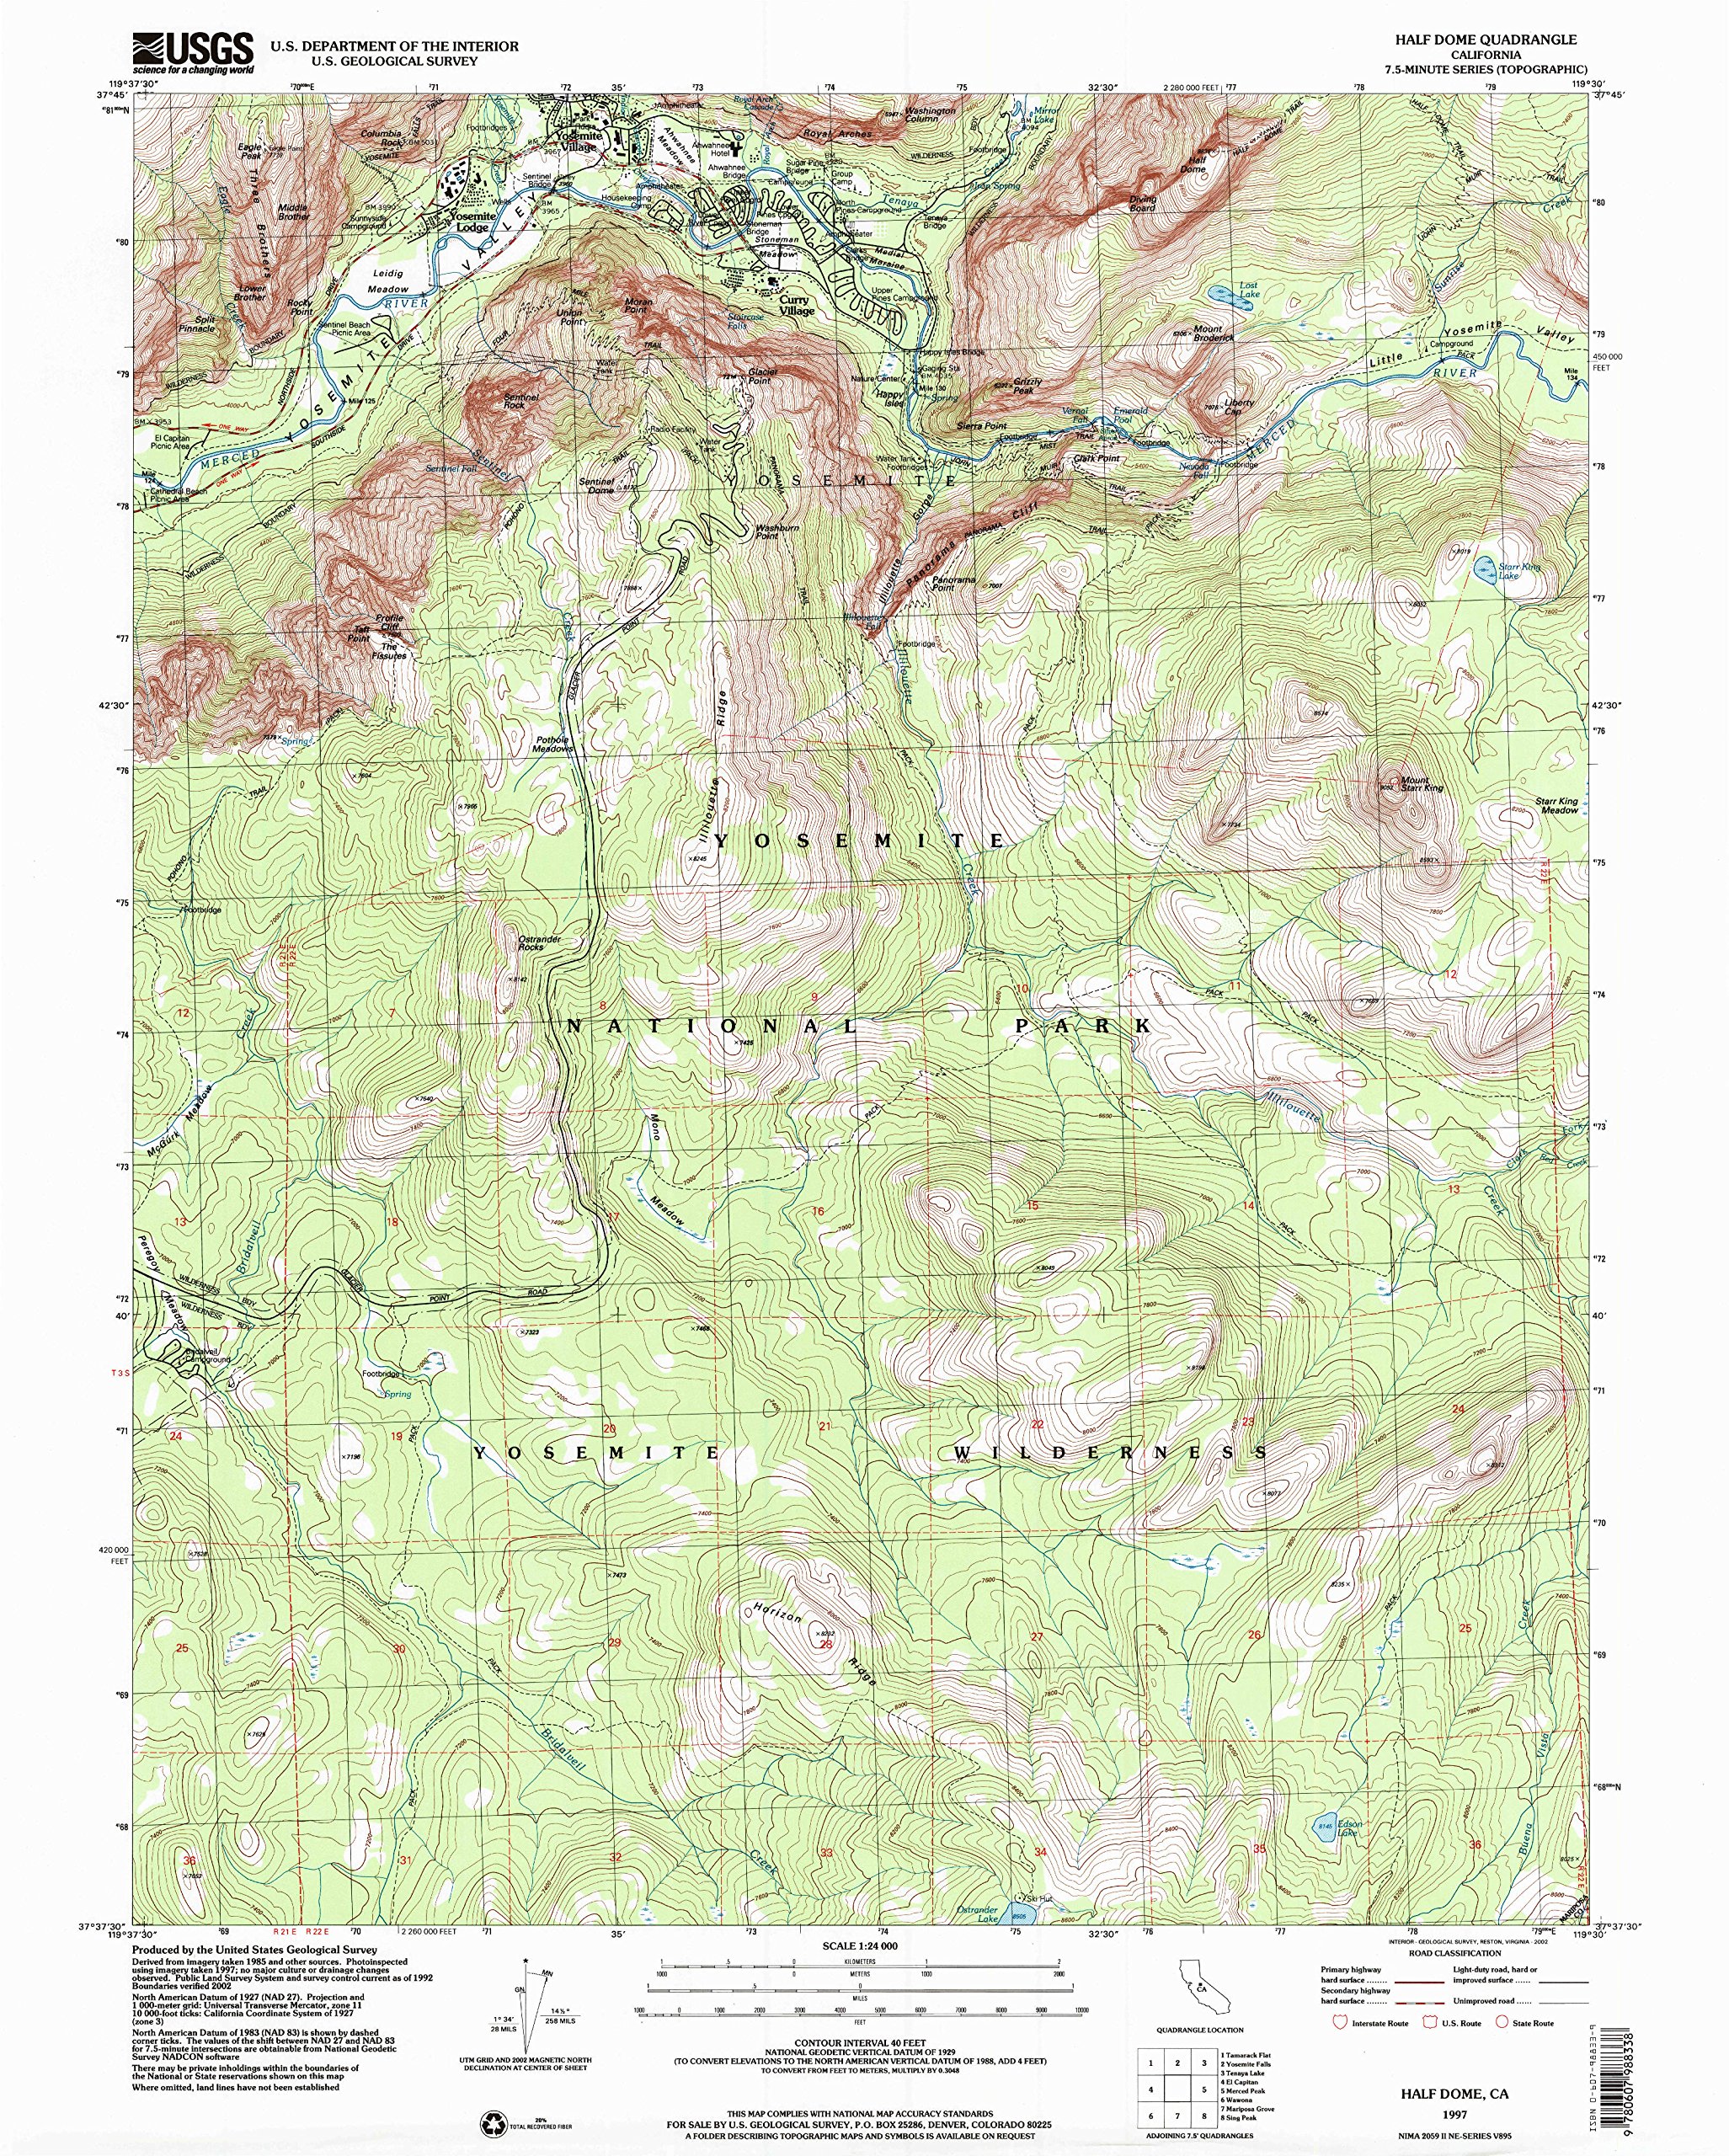 YellowMaps Las Vegas NV topo map, 1:250000 Scale, 1 X 2 Degree, Historical,  1957, Updated 1957, 22.8 x 32.2 in